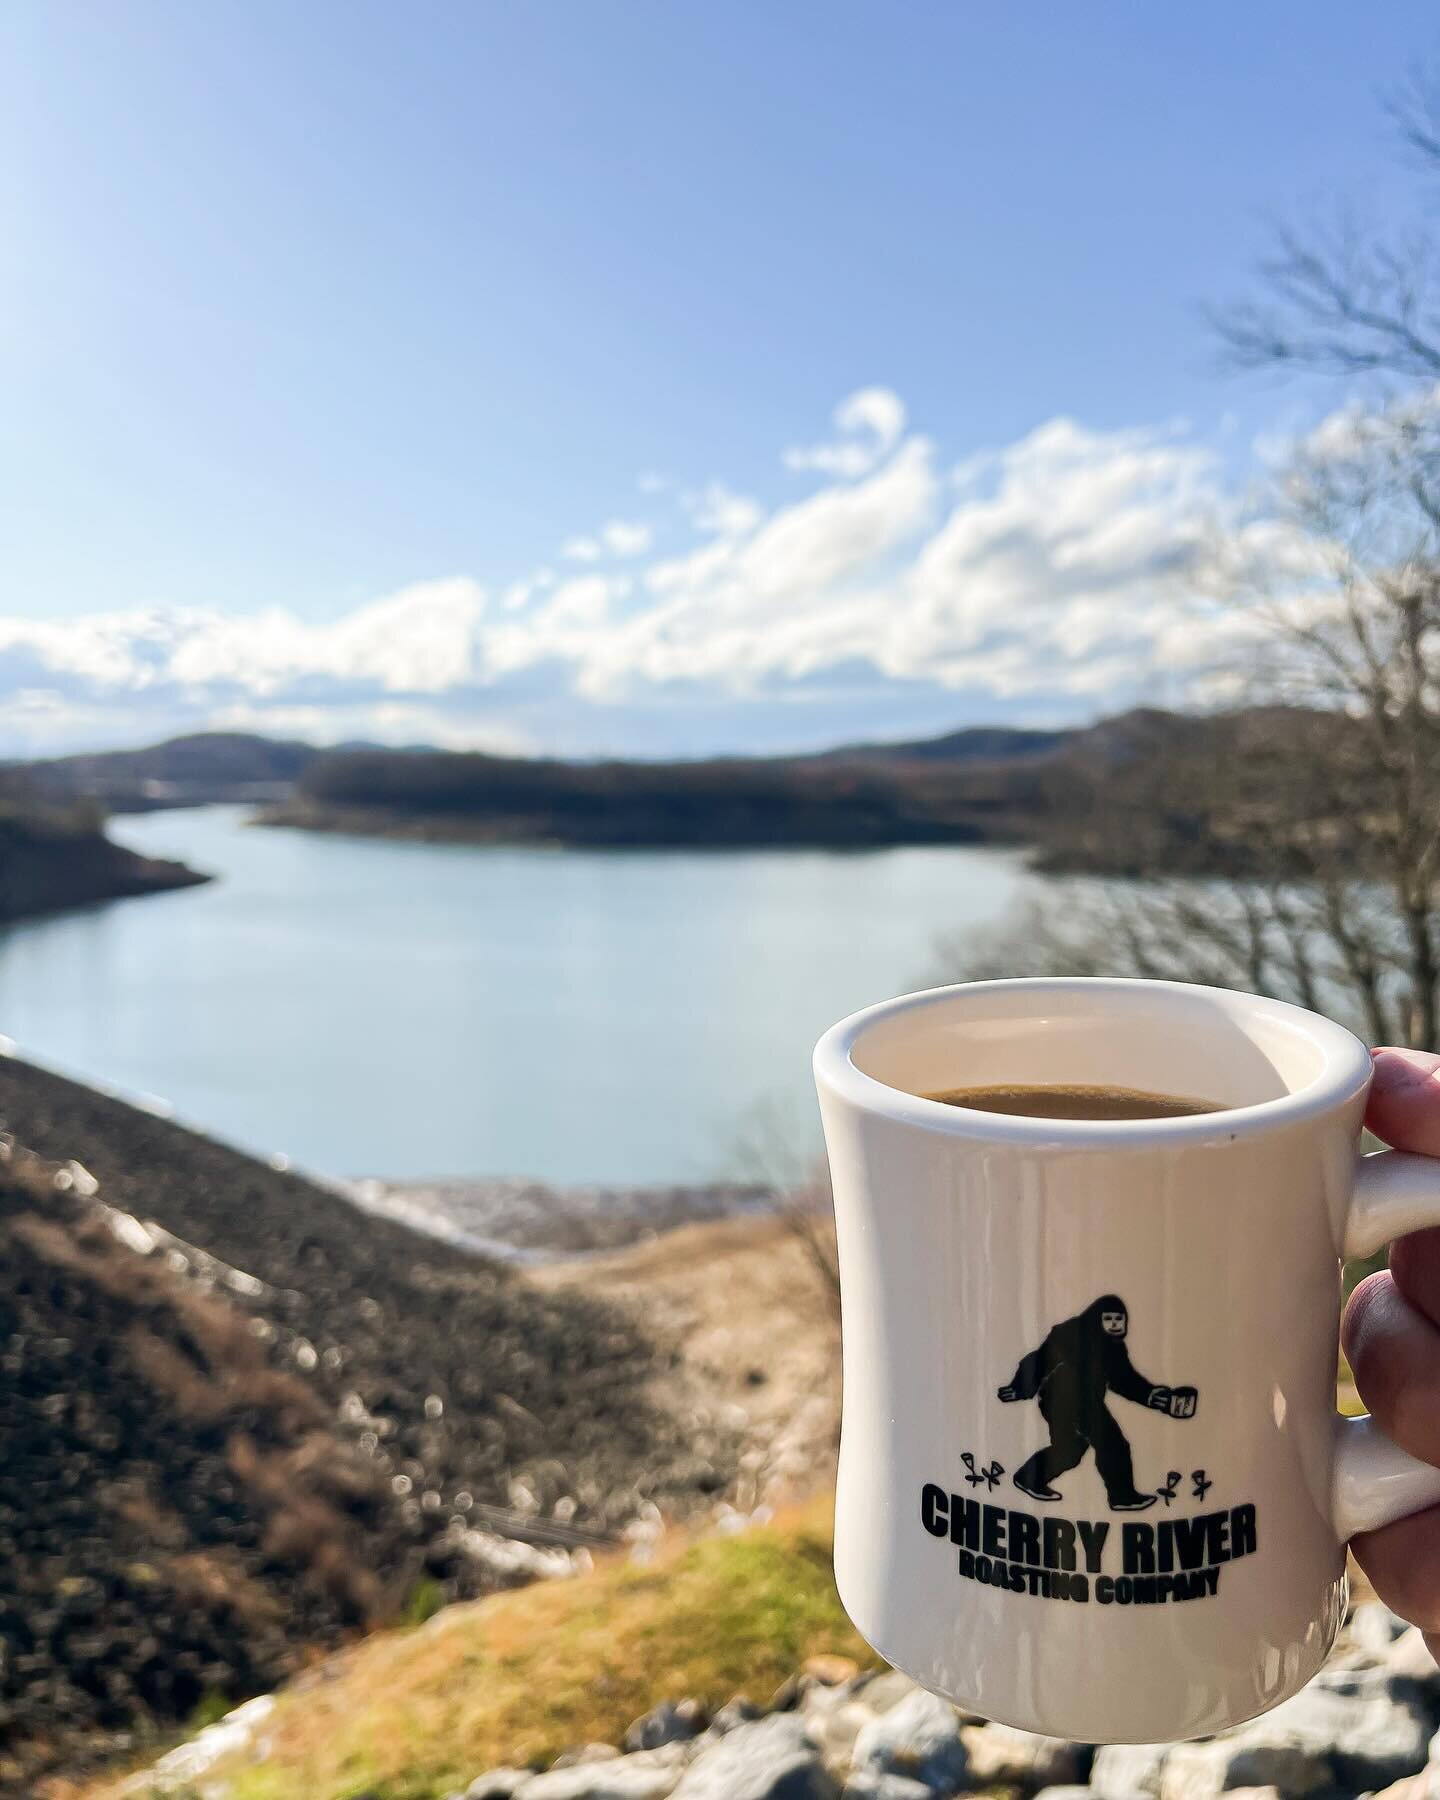 Are you a lake half full or lake half empty kinda person? It&rsquo;s just a short time before Summersville Lake is filled back up! ☀️
.
.
.
.
.
.
#wv #wvlocal #wvoutdoors #wvcoffee #coffee #coffeeroaster #local #localbusiness #localcoffee #localcoffe